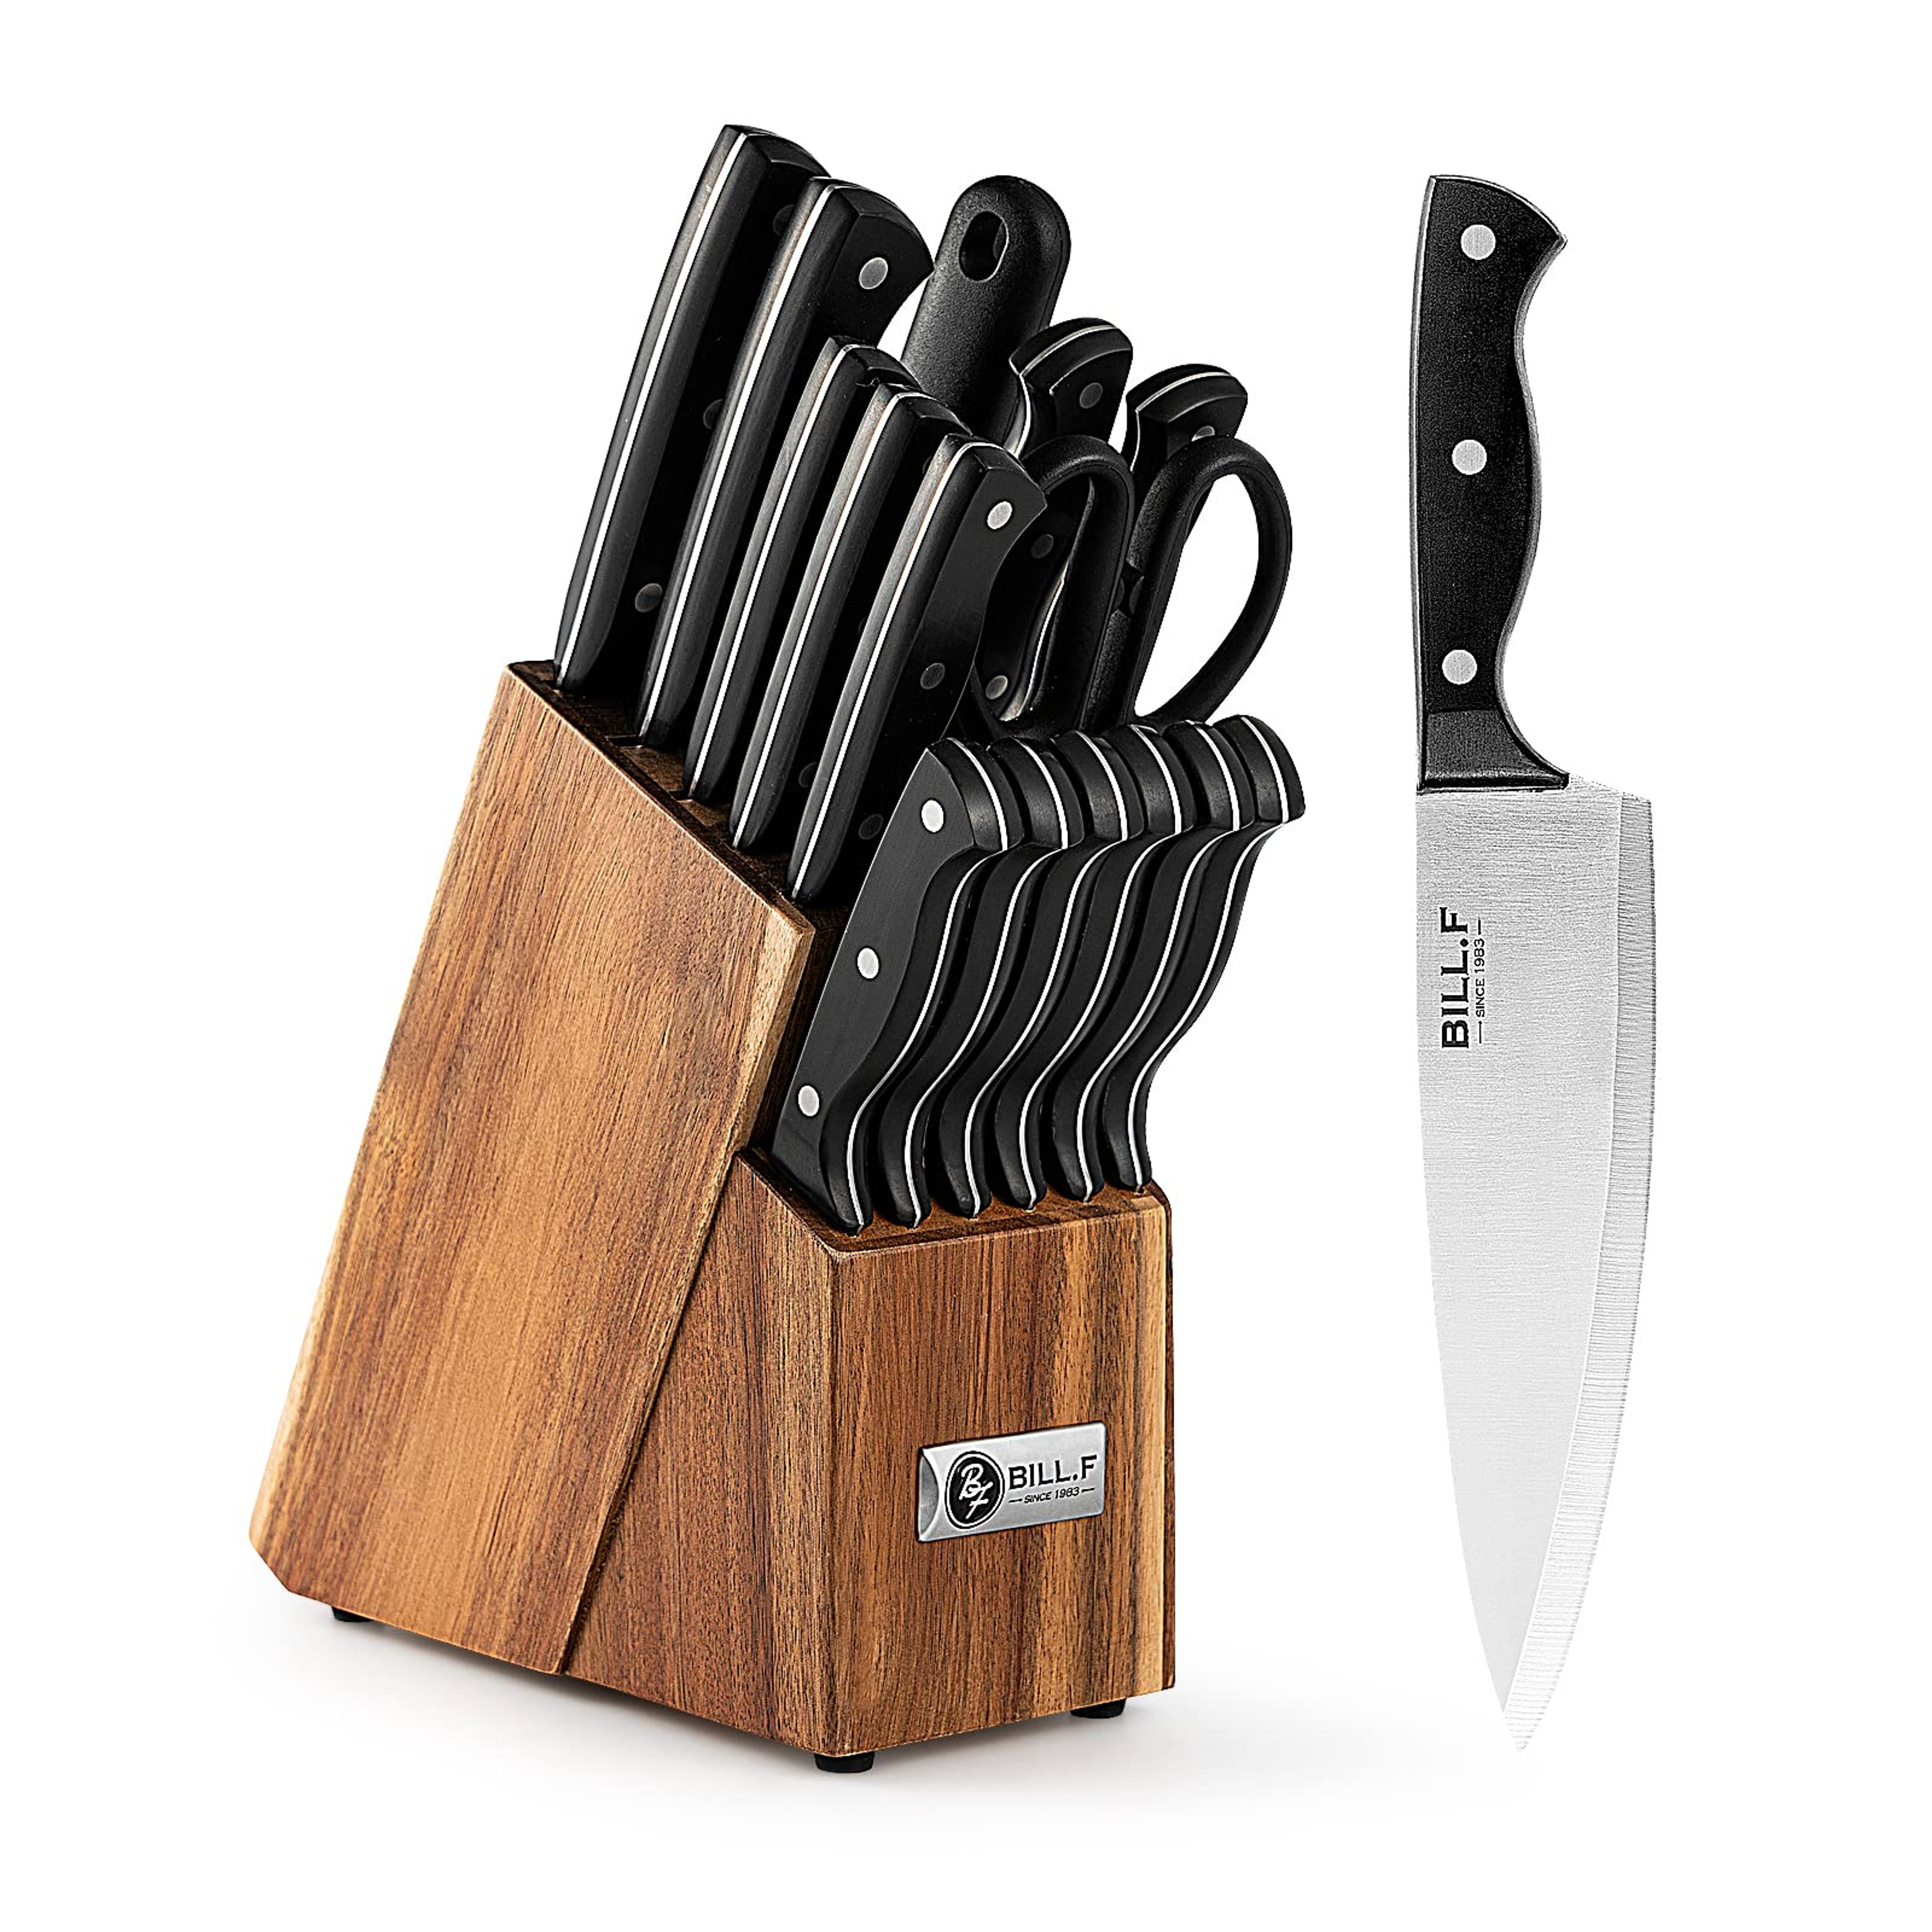 16 Pieces Chef Knife Set Professional Stainless Steel Kitchen Knives Cutlery Set